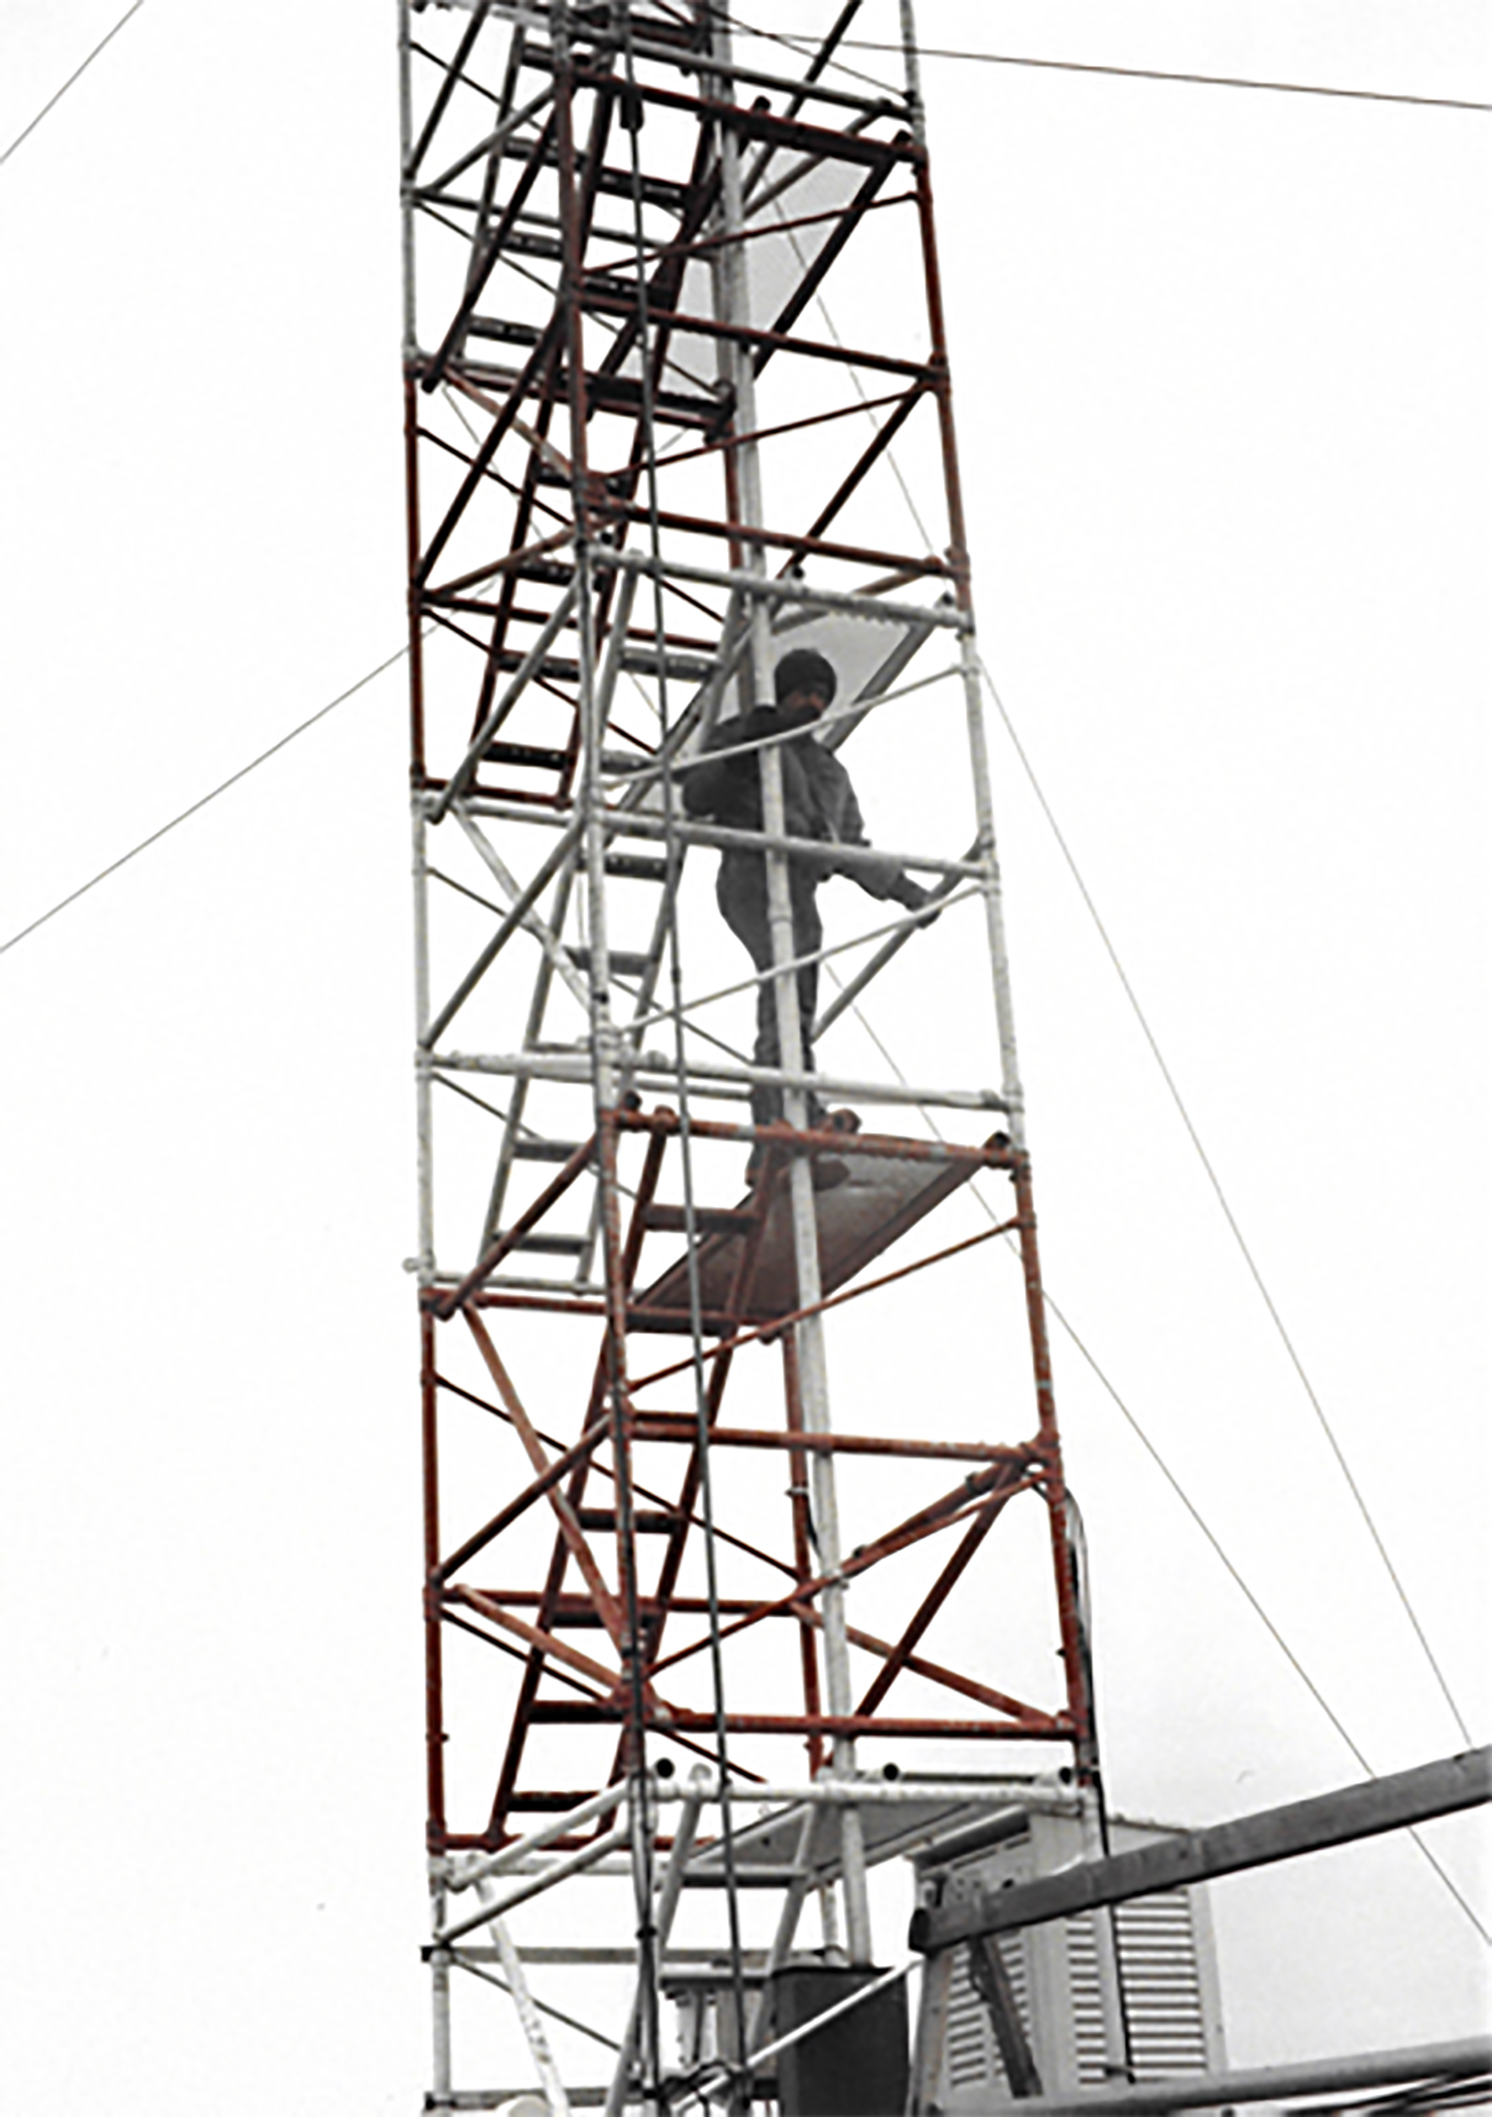 This original 60-foot (18-meter) tall sampling tower has been replaced by a similar 100-foot (30-meter) tower. Interior scaffolding enables researchers to sample air at different heights, far above vegetation, temperature. wind speed and other influences on the ground.